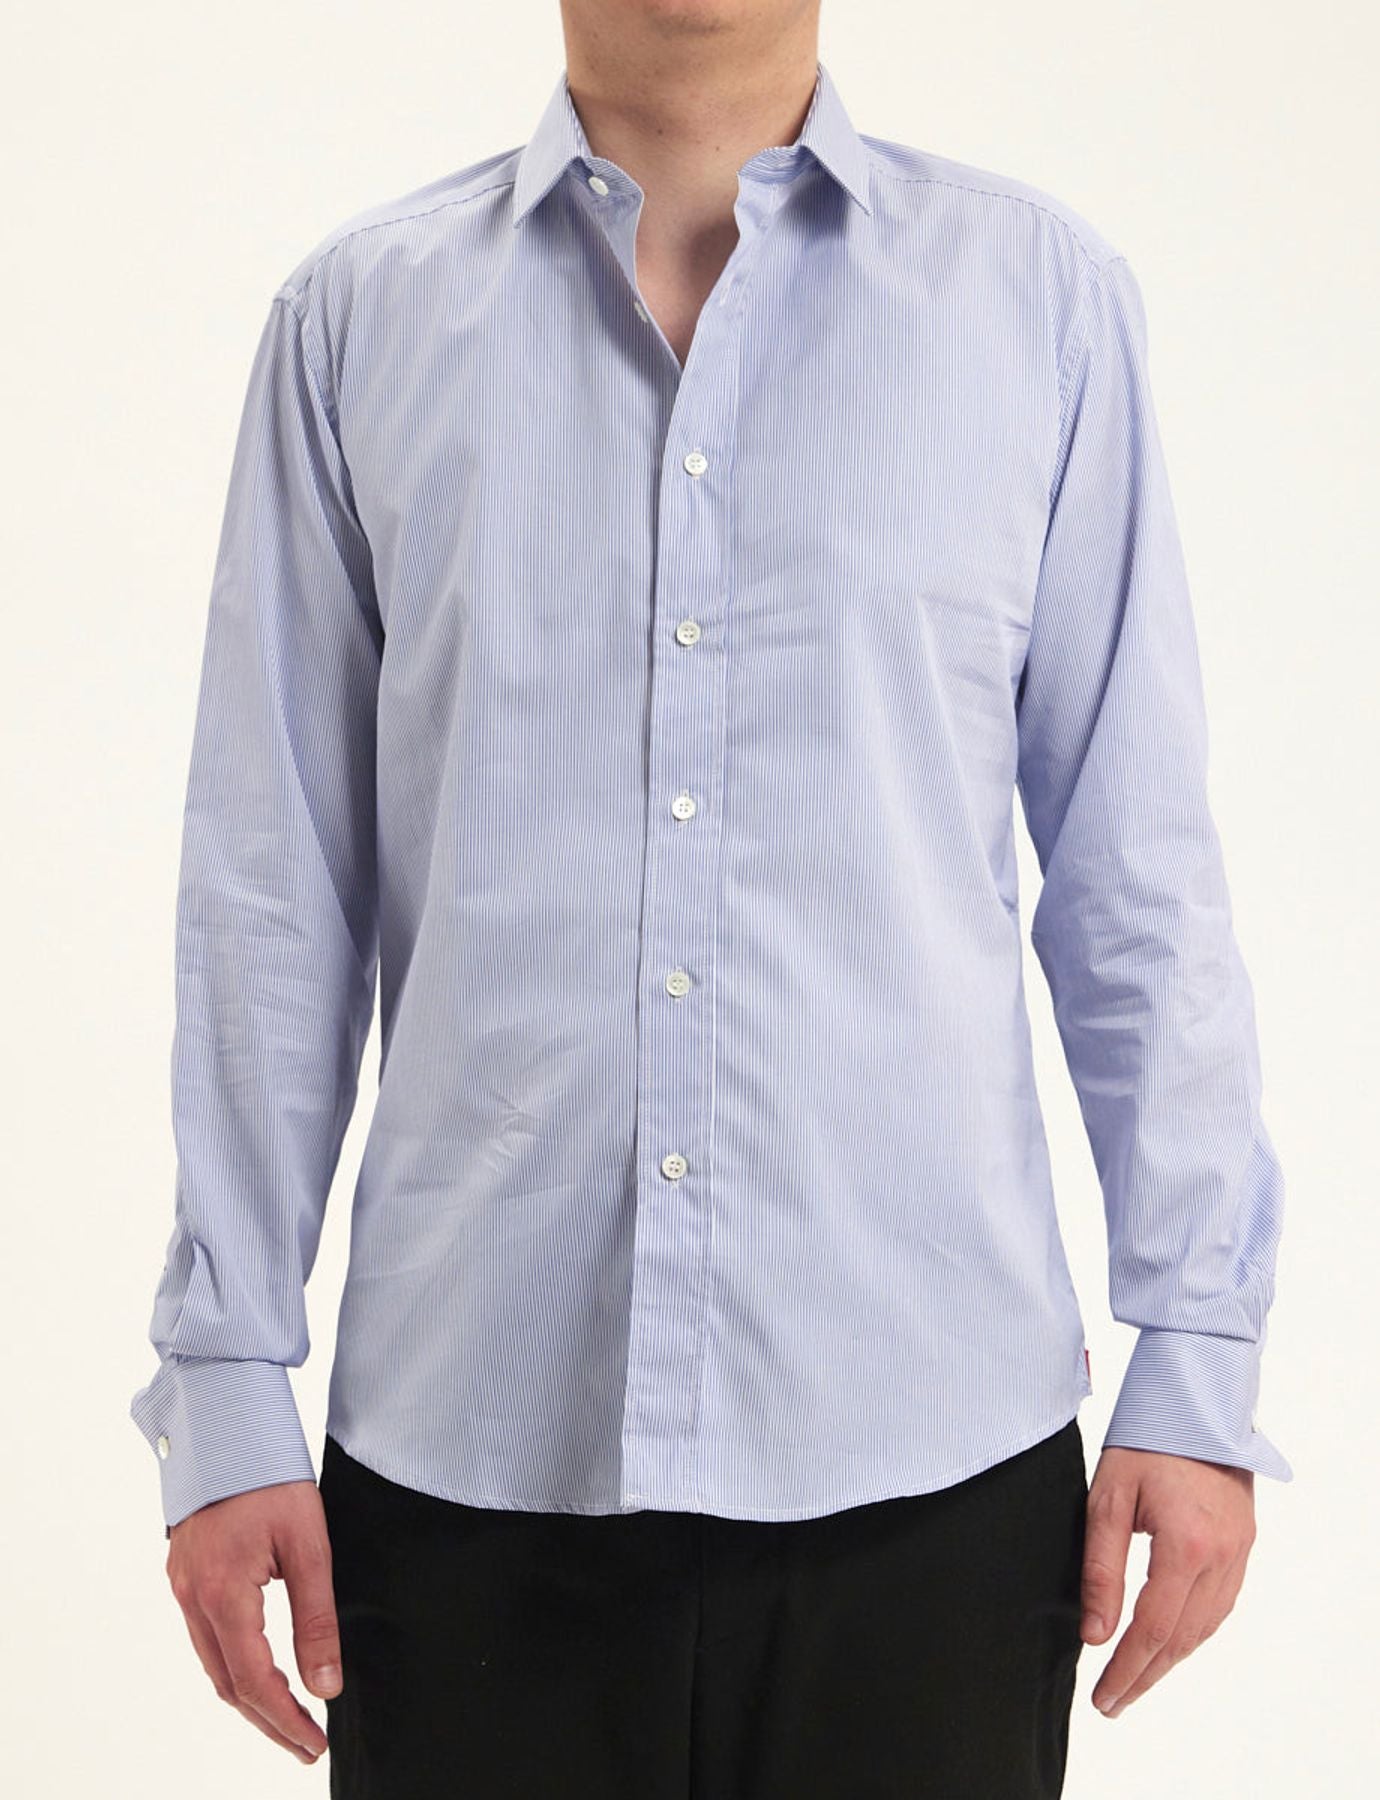 chemise-pour-homme-olivier-bleue-a-rayures-blanches